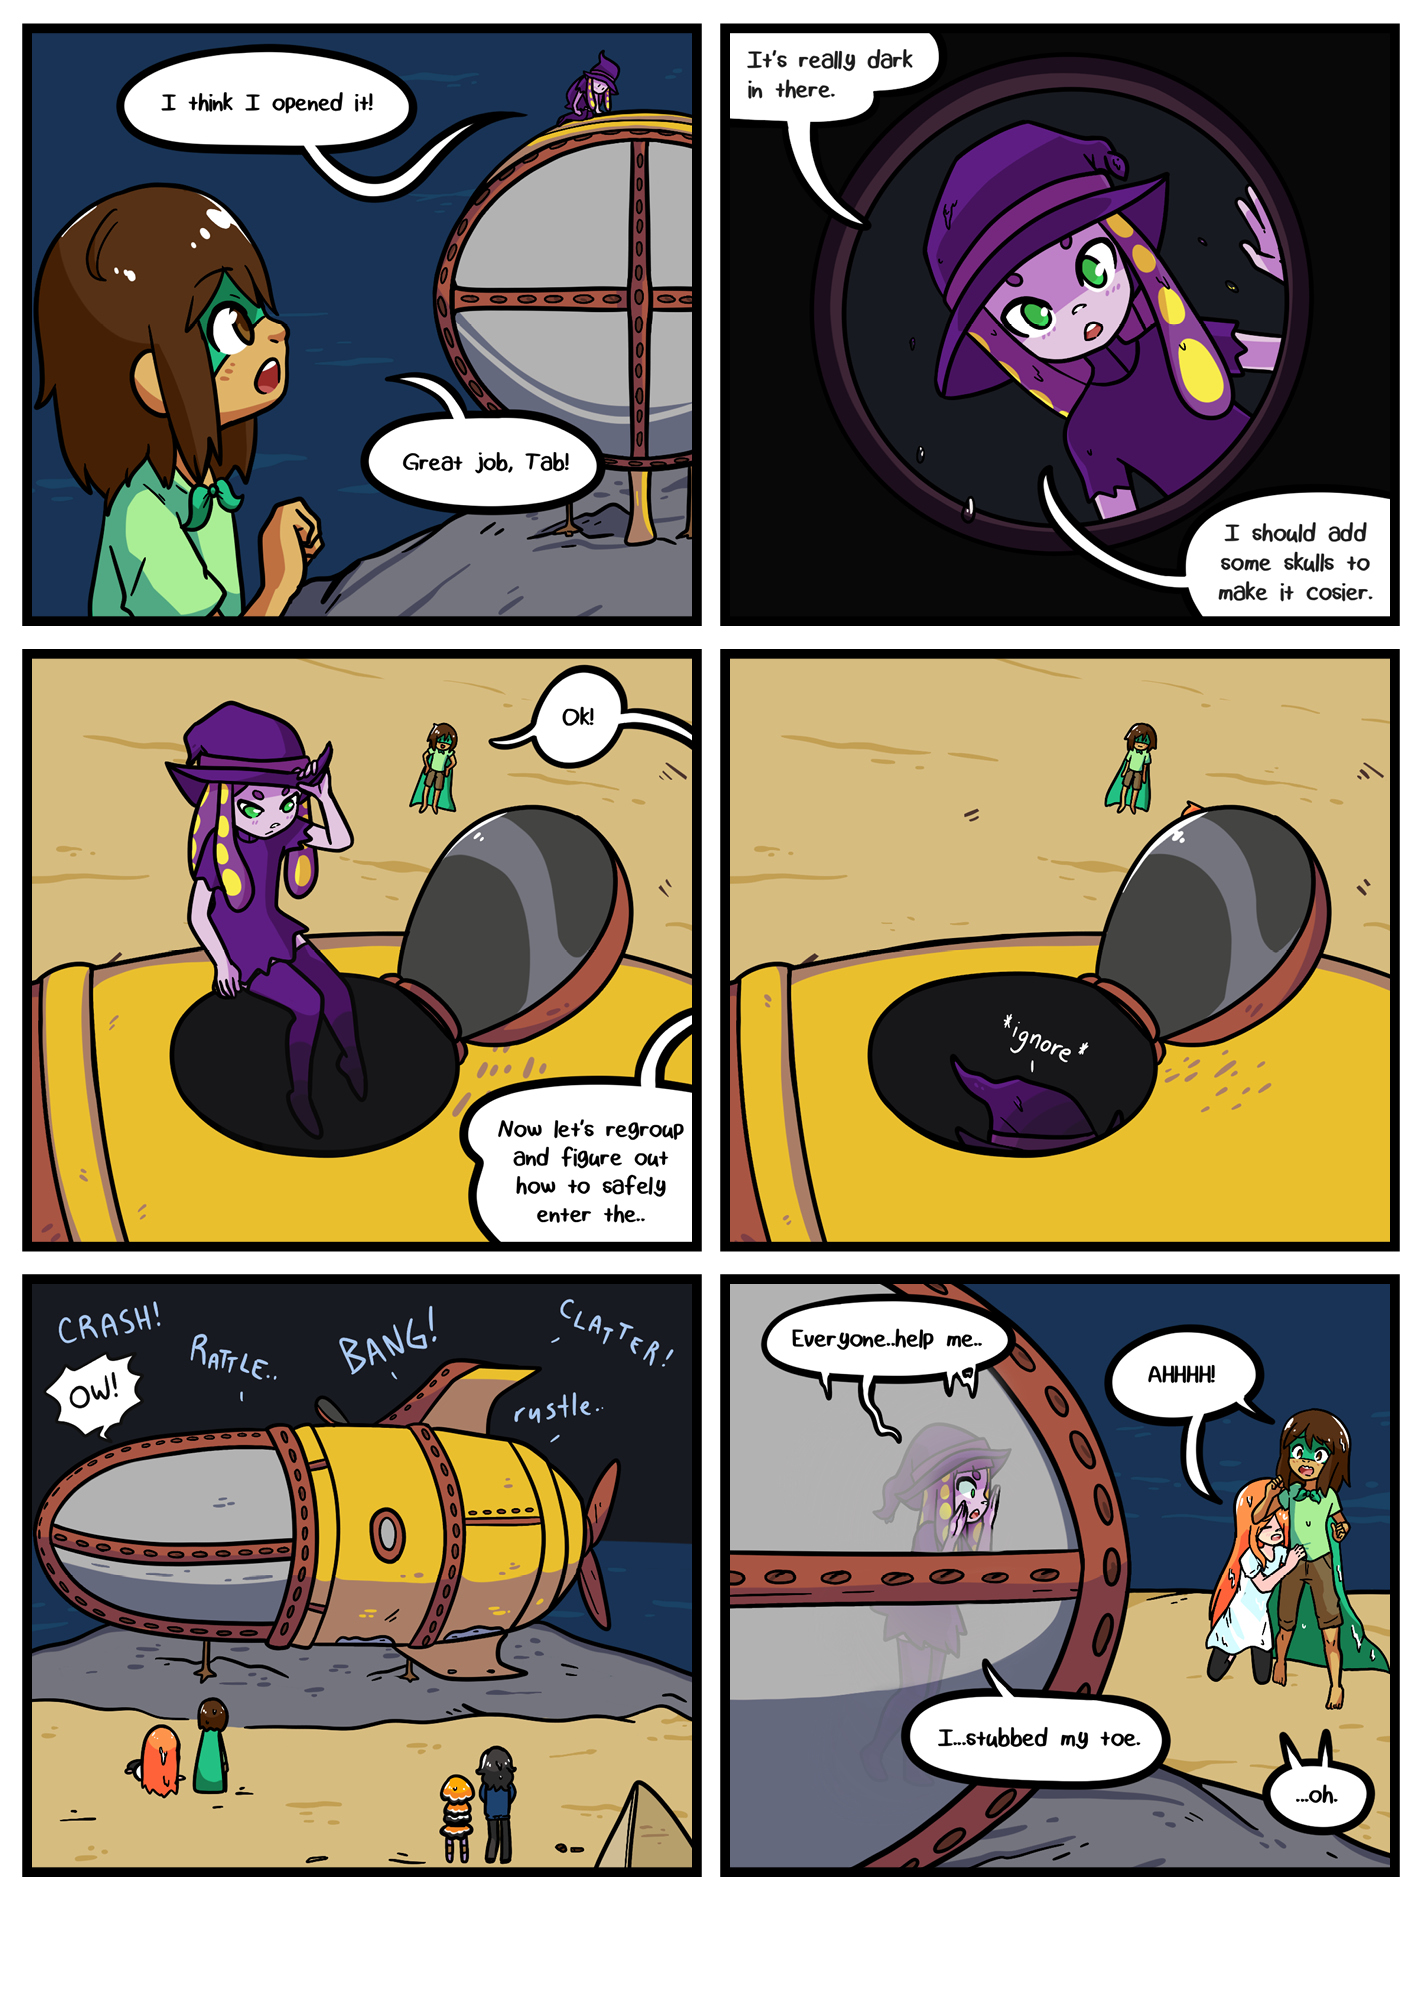 Seasick the underwater adventure comic, chapter 2 page 87 full